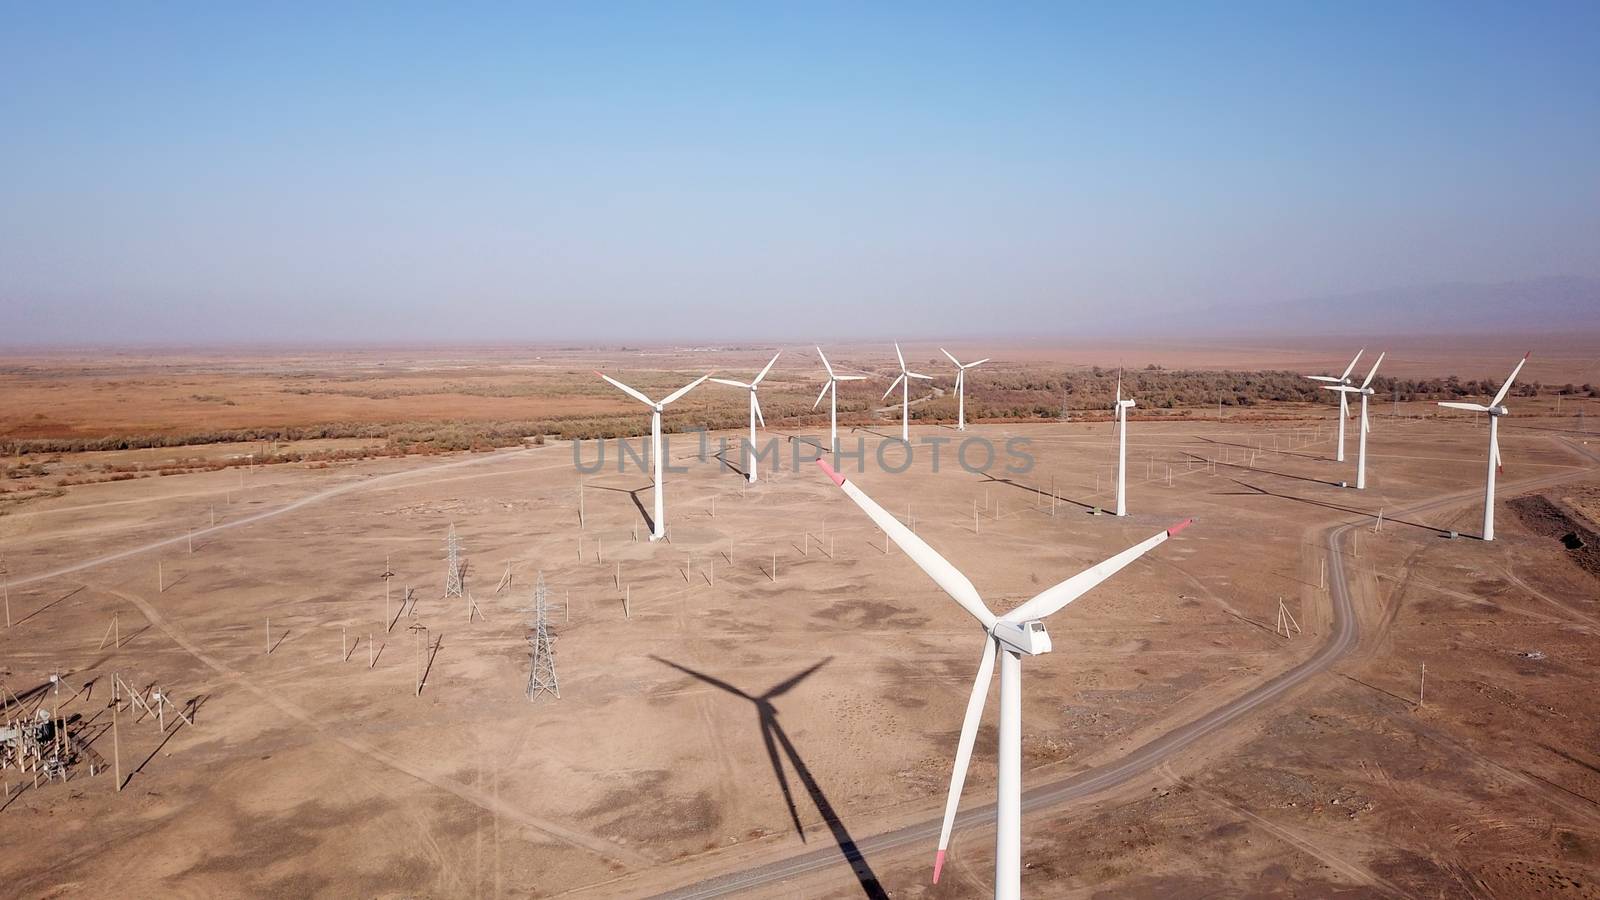 Windmills in the steppe. Near a small town. Alternative, clean energy. Top view from the drone on the long blades. The propeller spins, shadows fall to the ground. Orange sand, near a farm. Kazakhstan